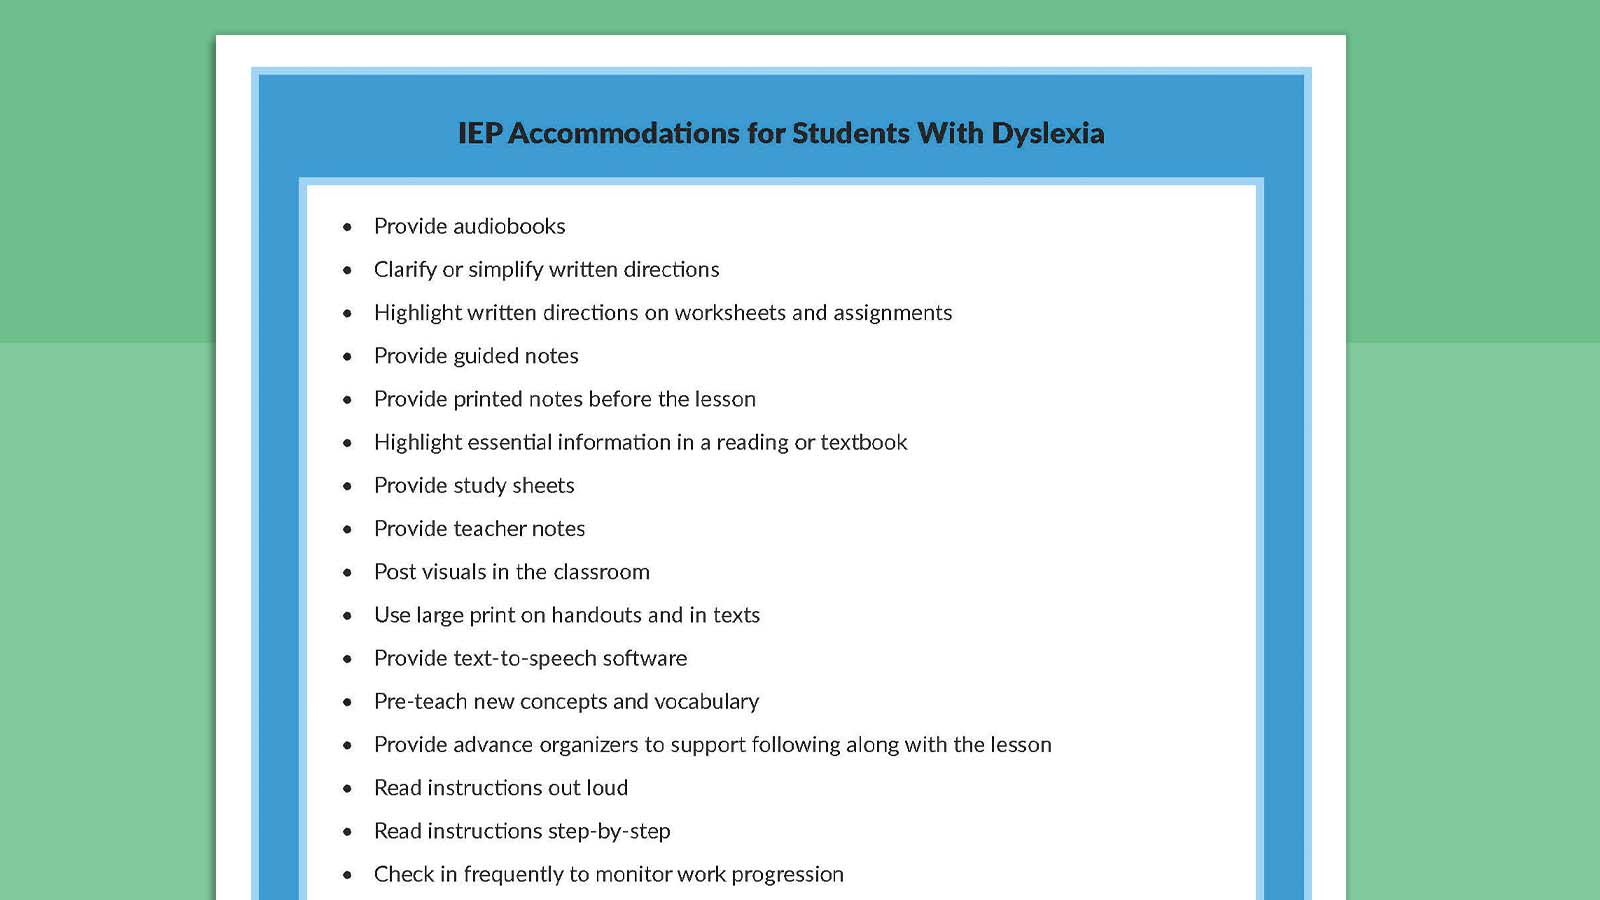 Printable sheet listing IEP accommodations with dyslexia.